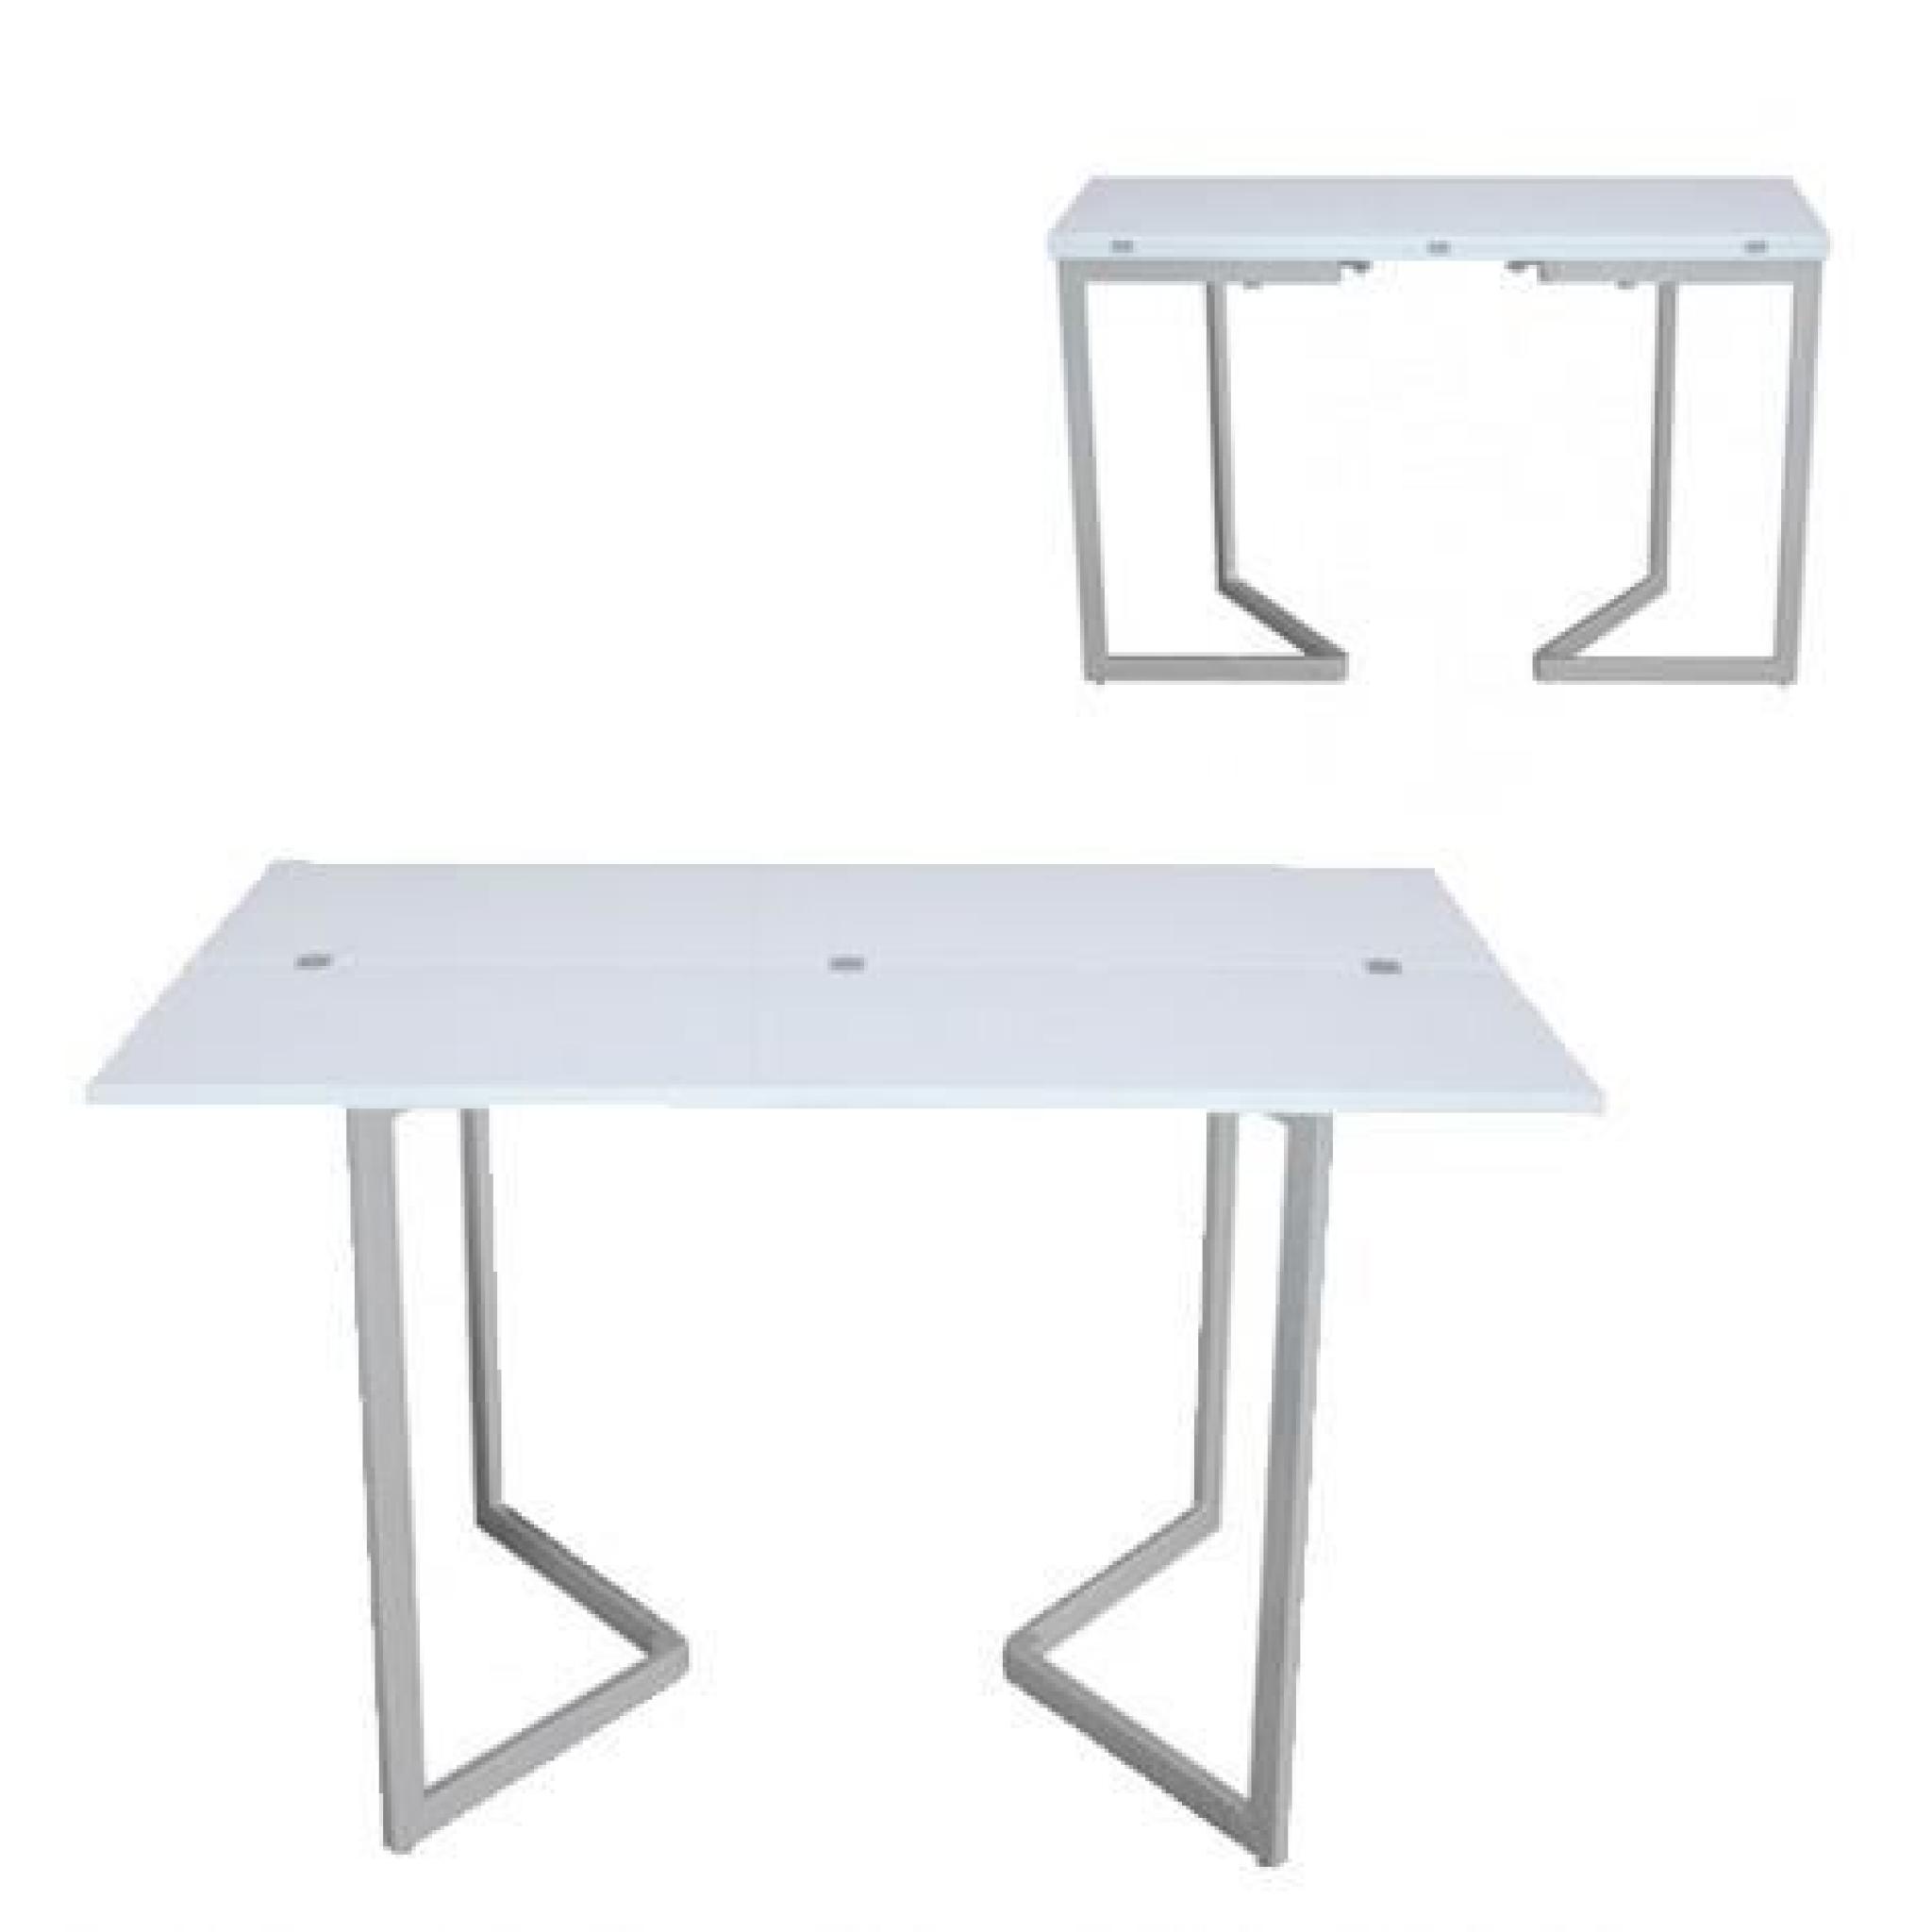 Table console mural extensible laquée blanc XENA